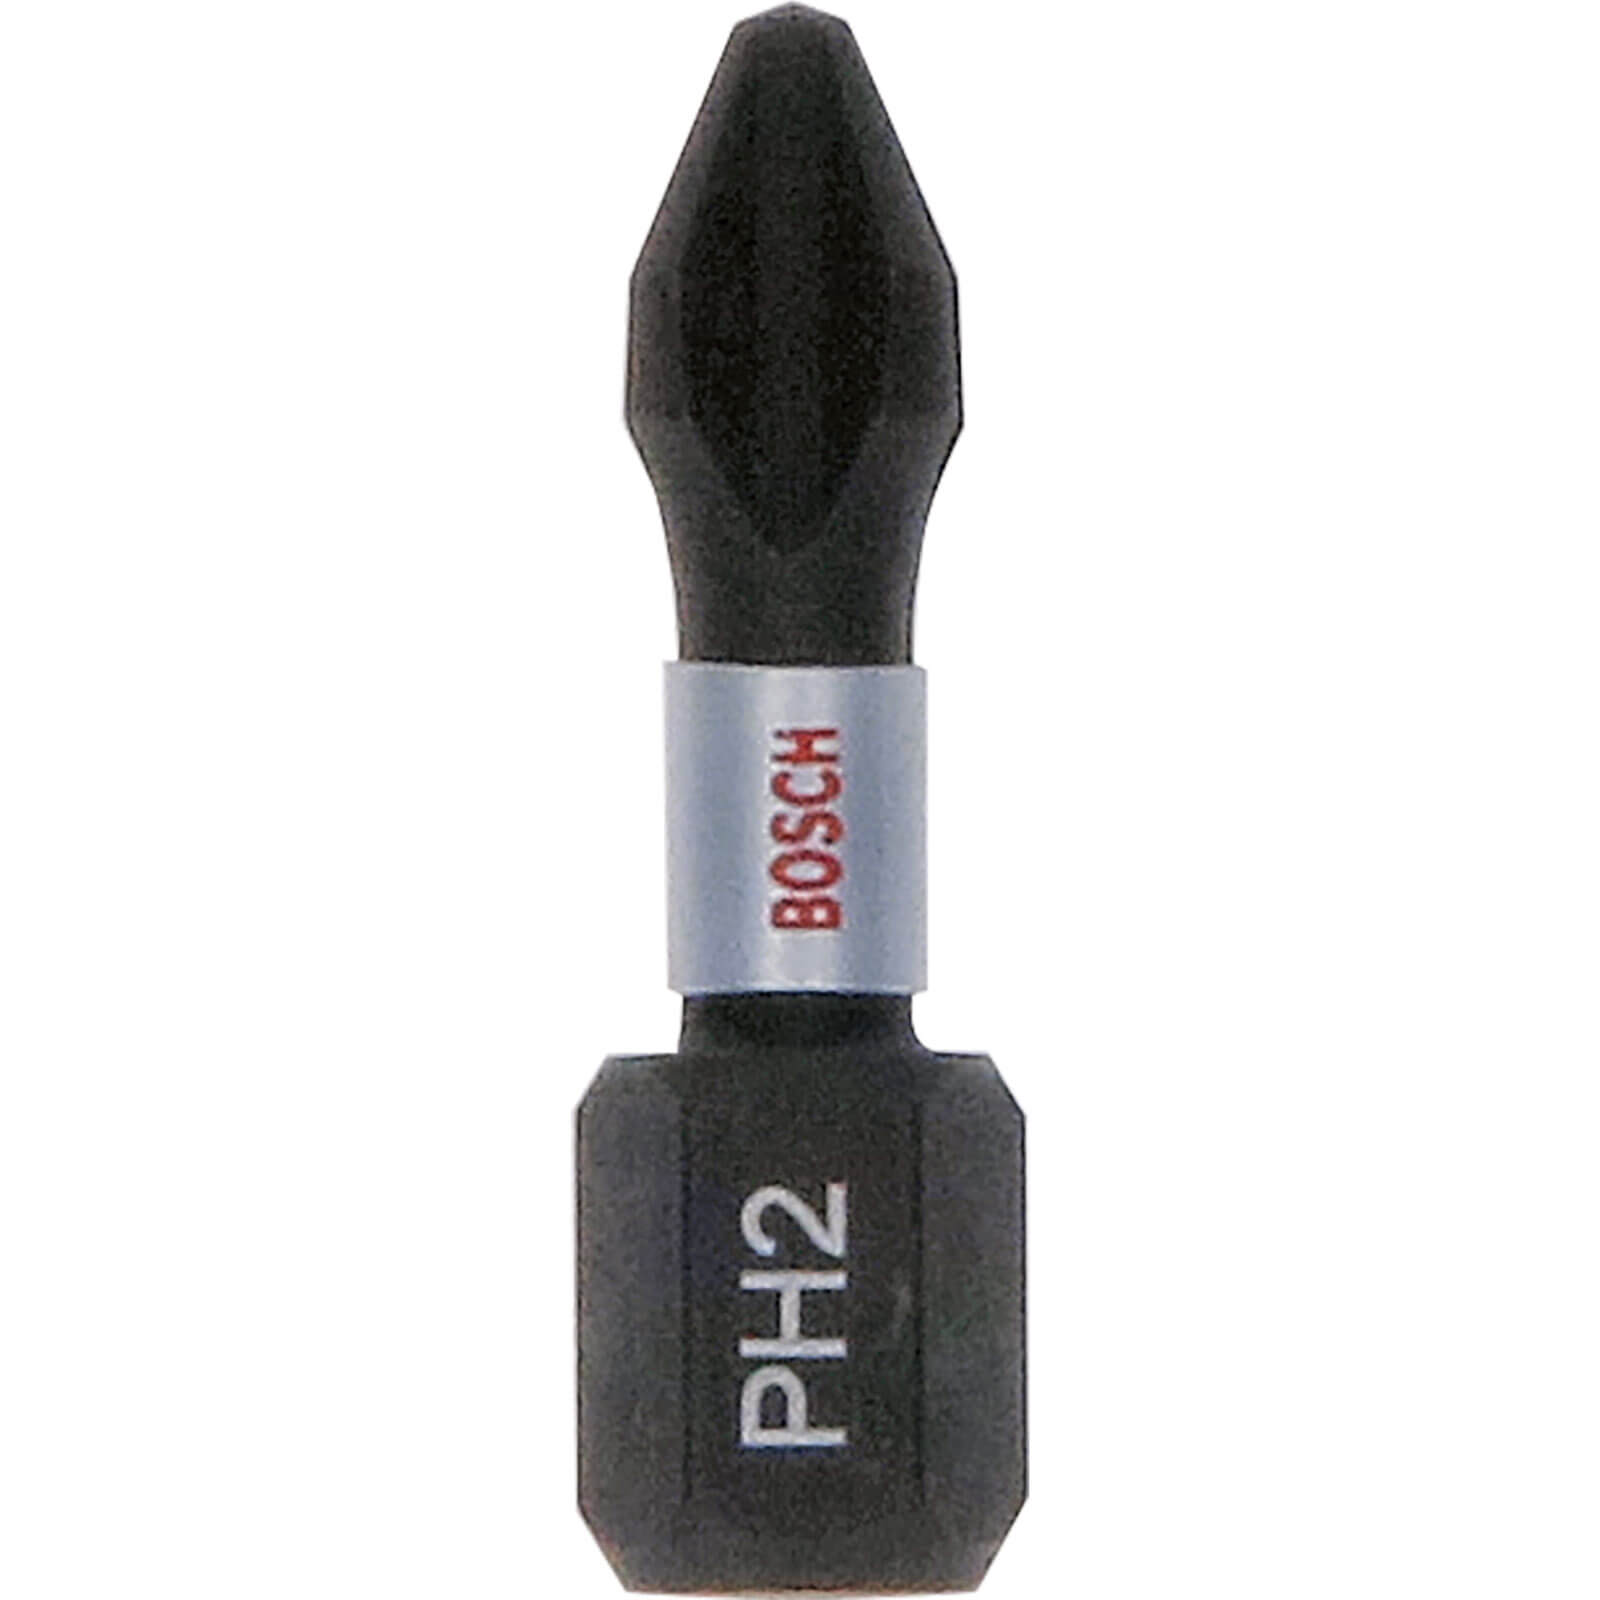 Image of Bosch Impact Control Torsion Phillips Screwdriver Bits PH2 25mm Pack of 25